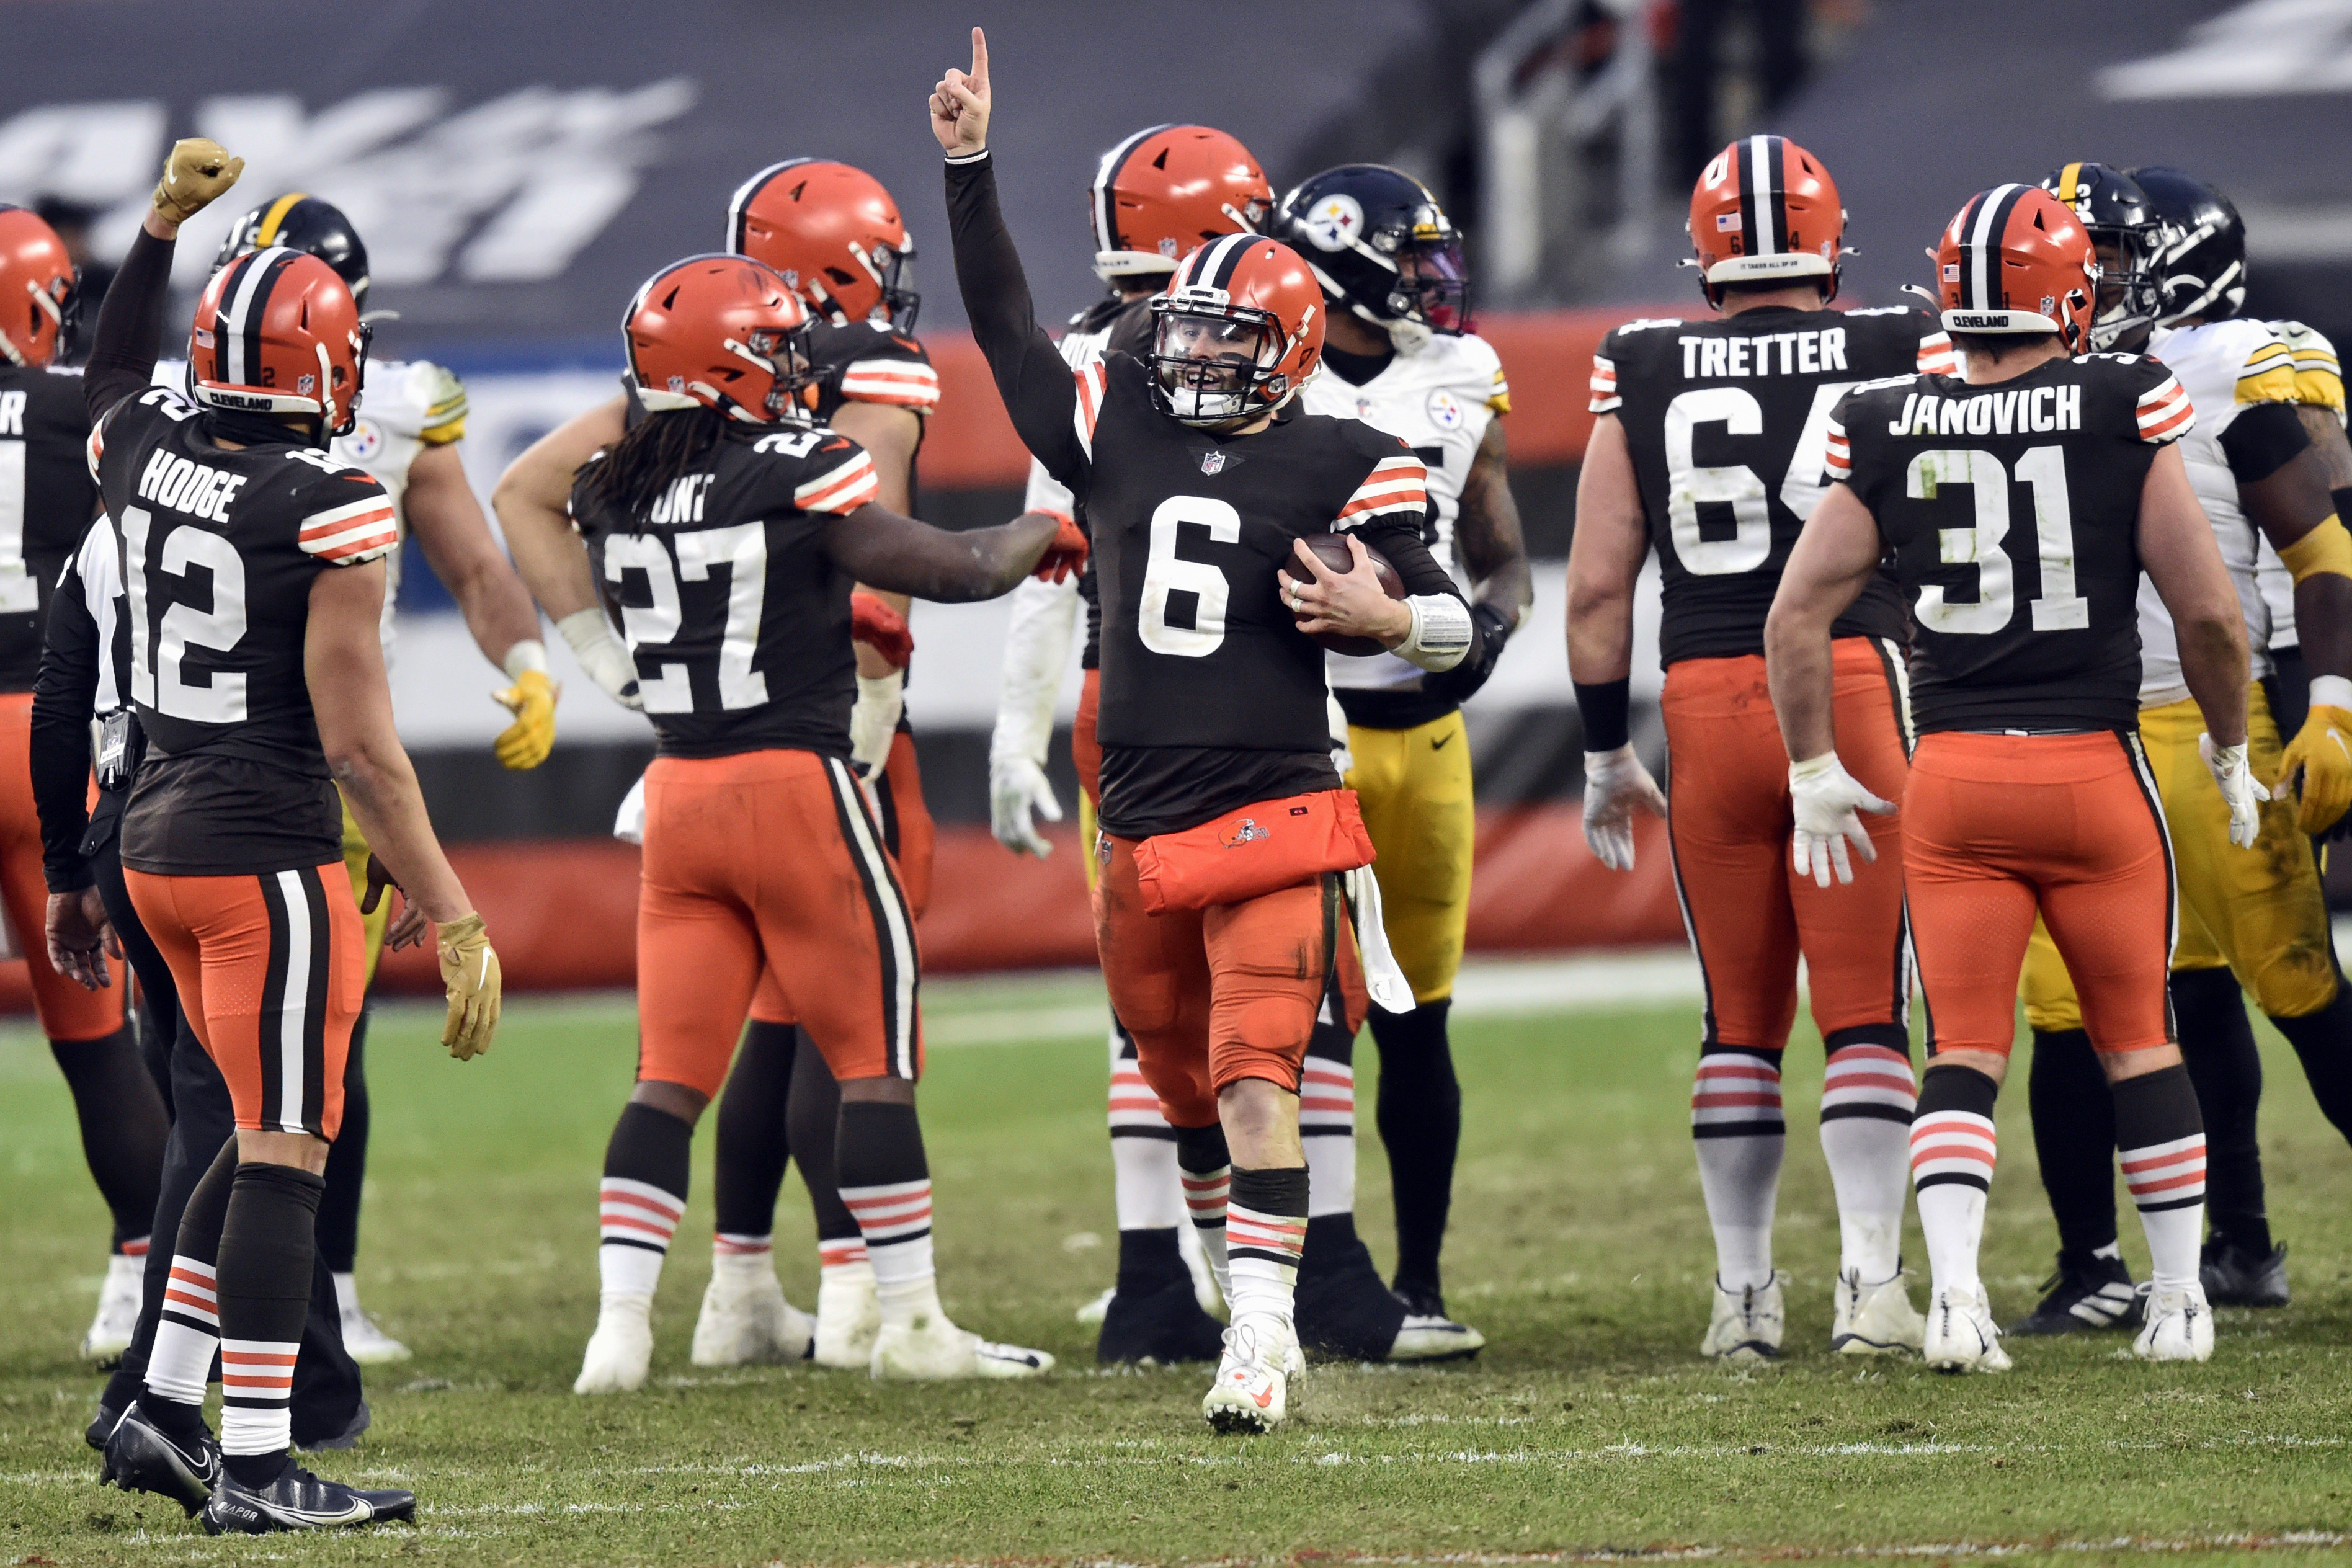 How to Watch Pittsburgh Steelers at Cleveland Browns on January 3, 2021